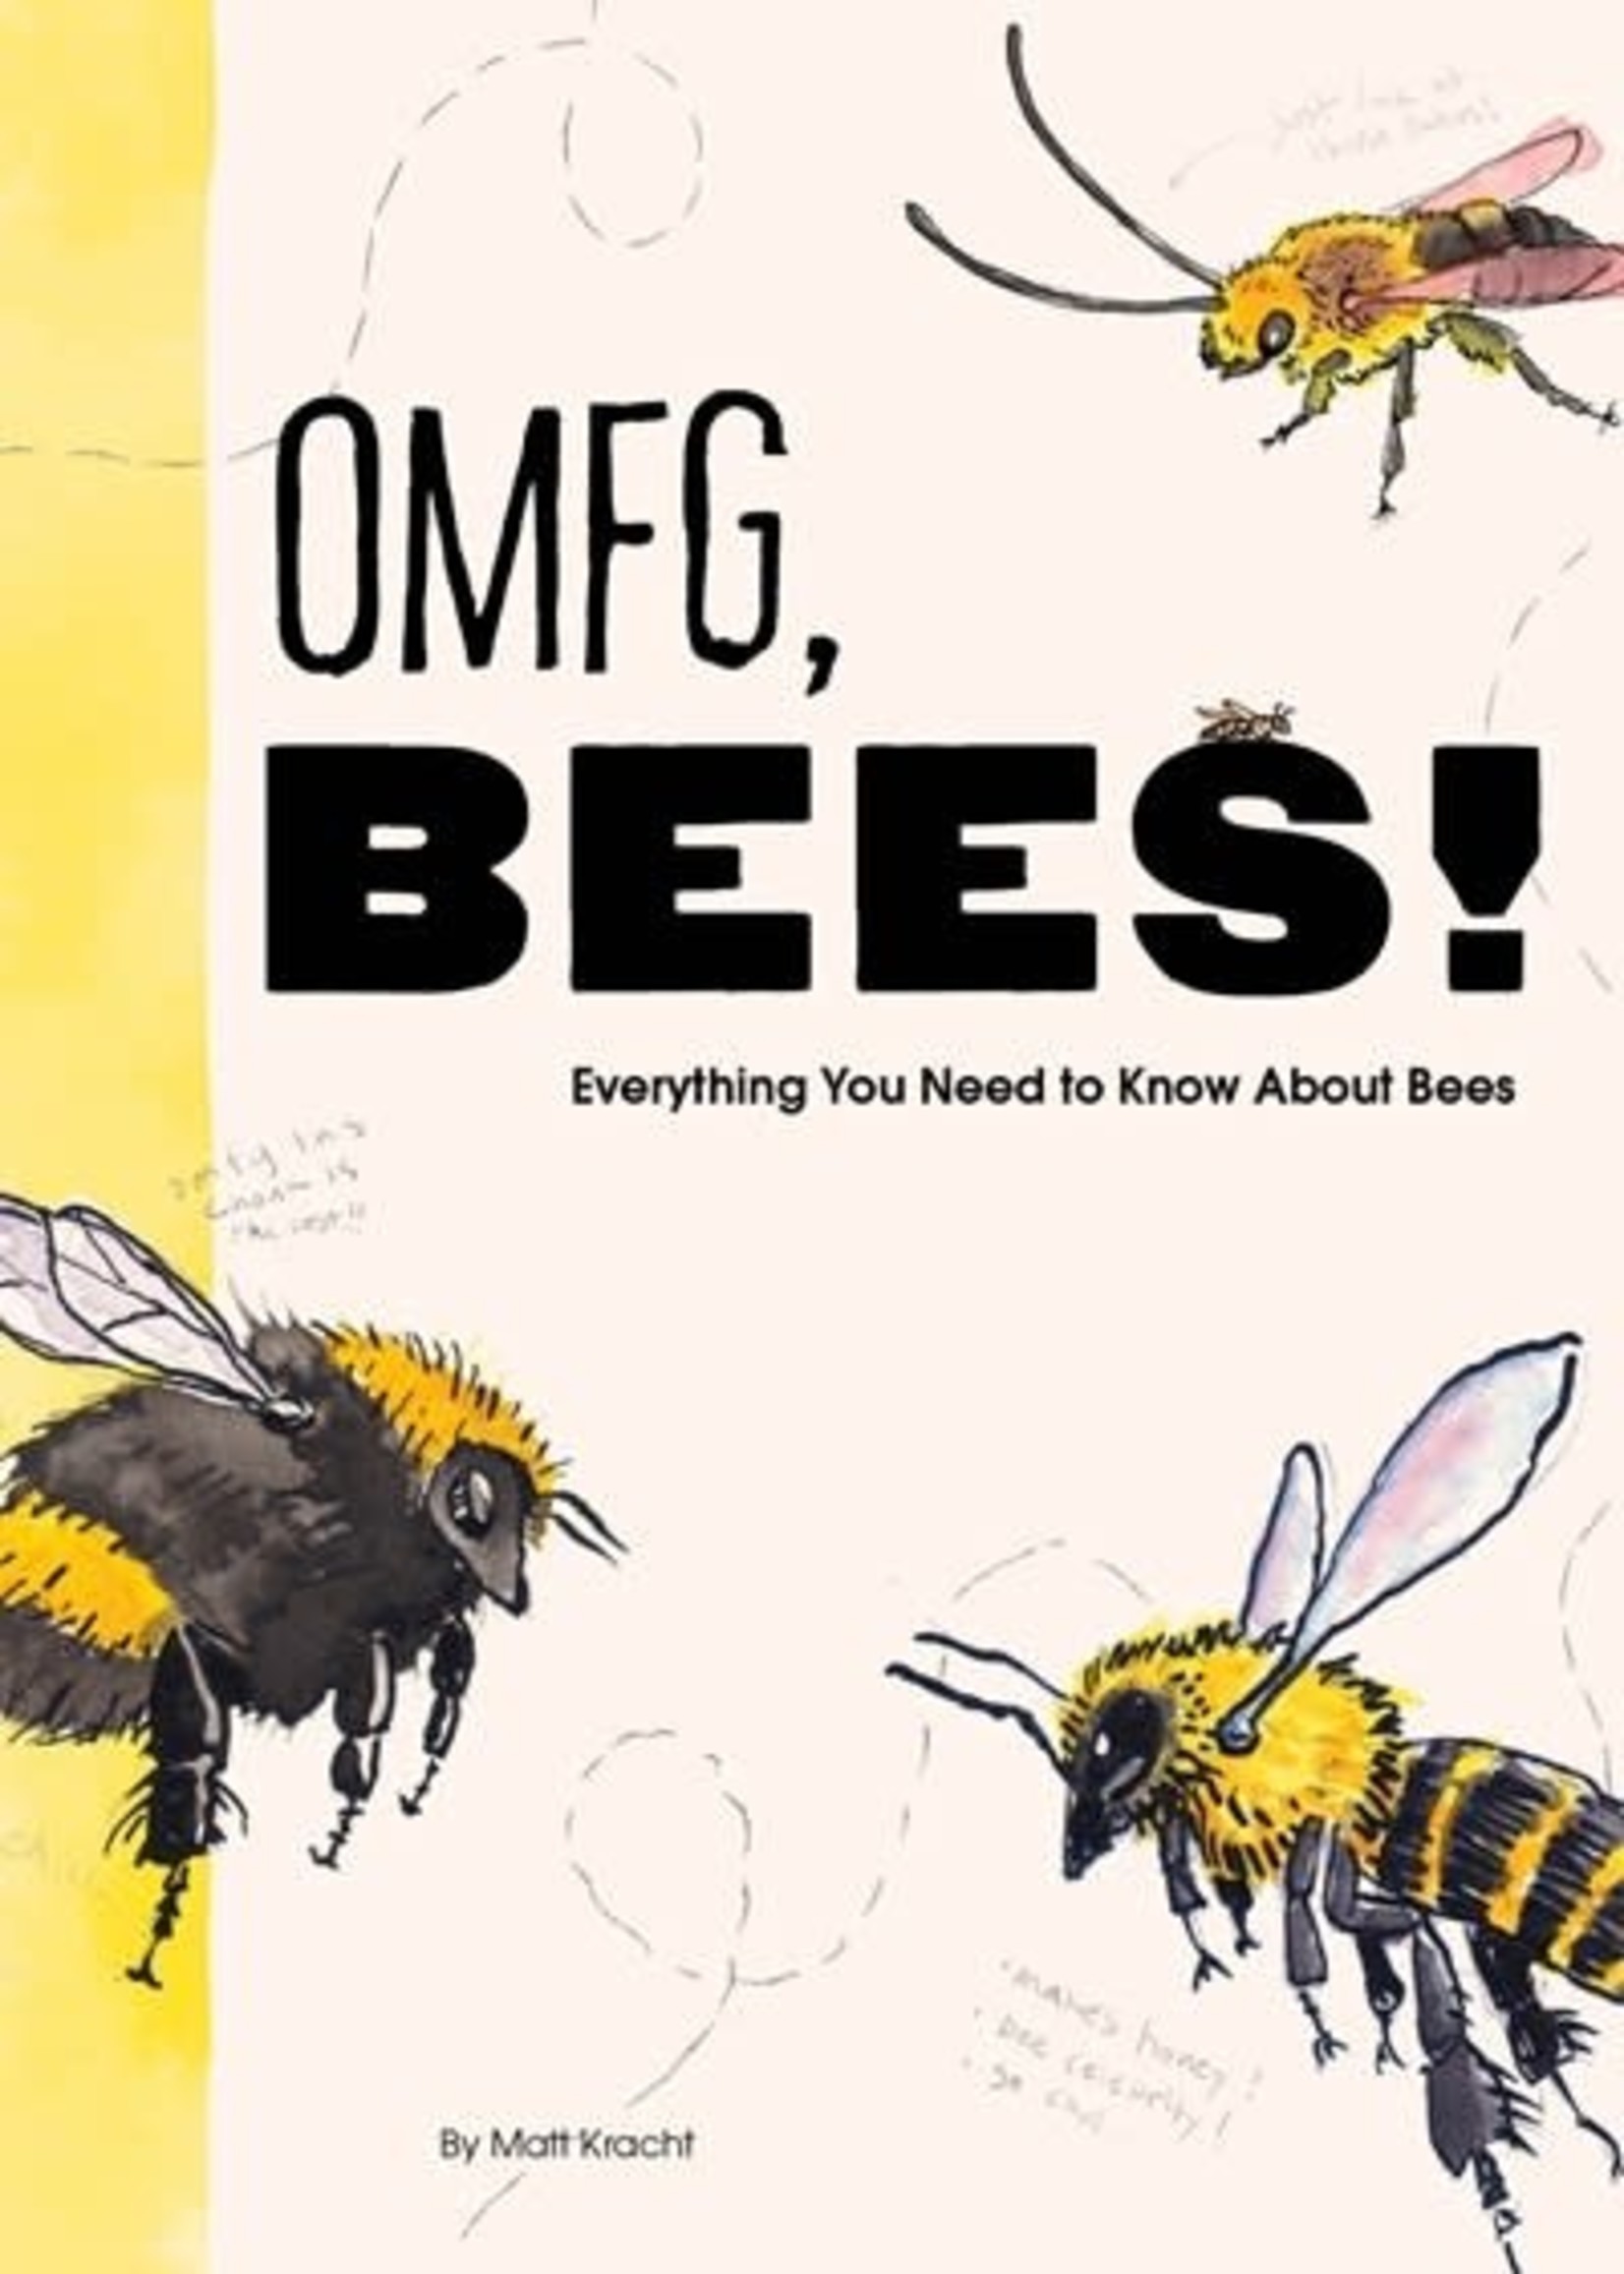 OMFG, BEES!: Bees Are So Amazing and You're About to Find Out Why by Matt Kracht